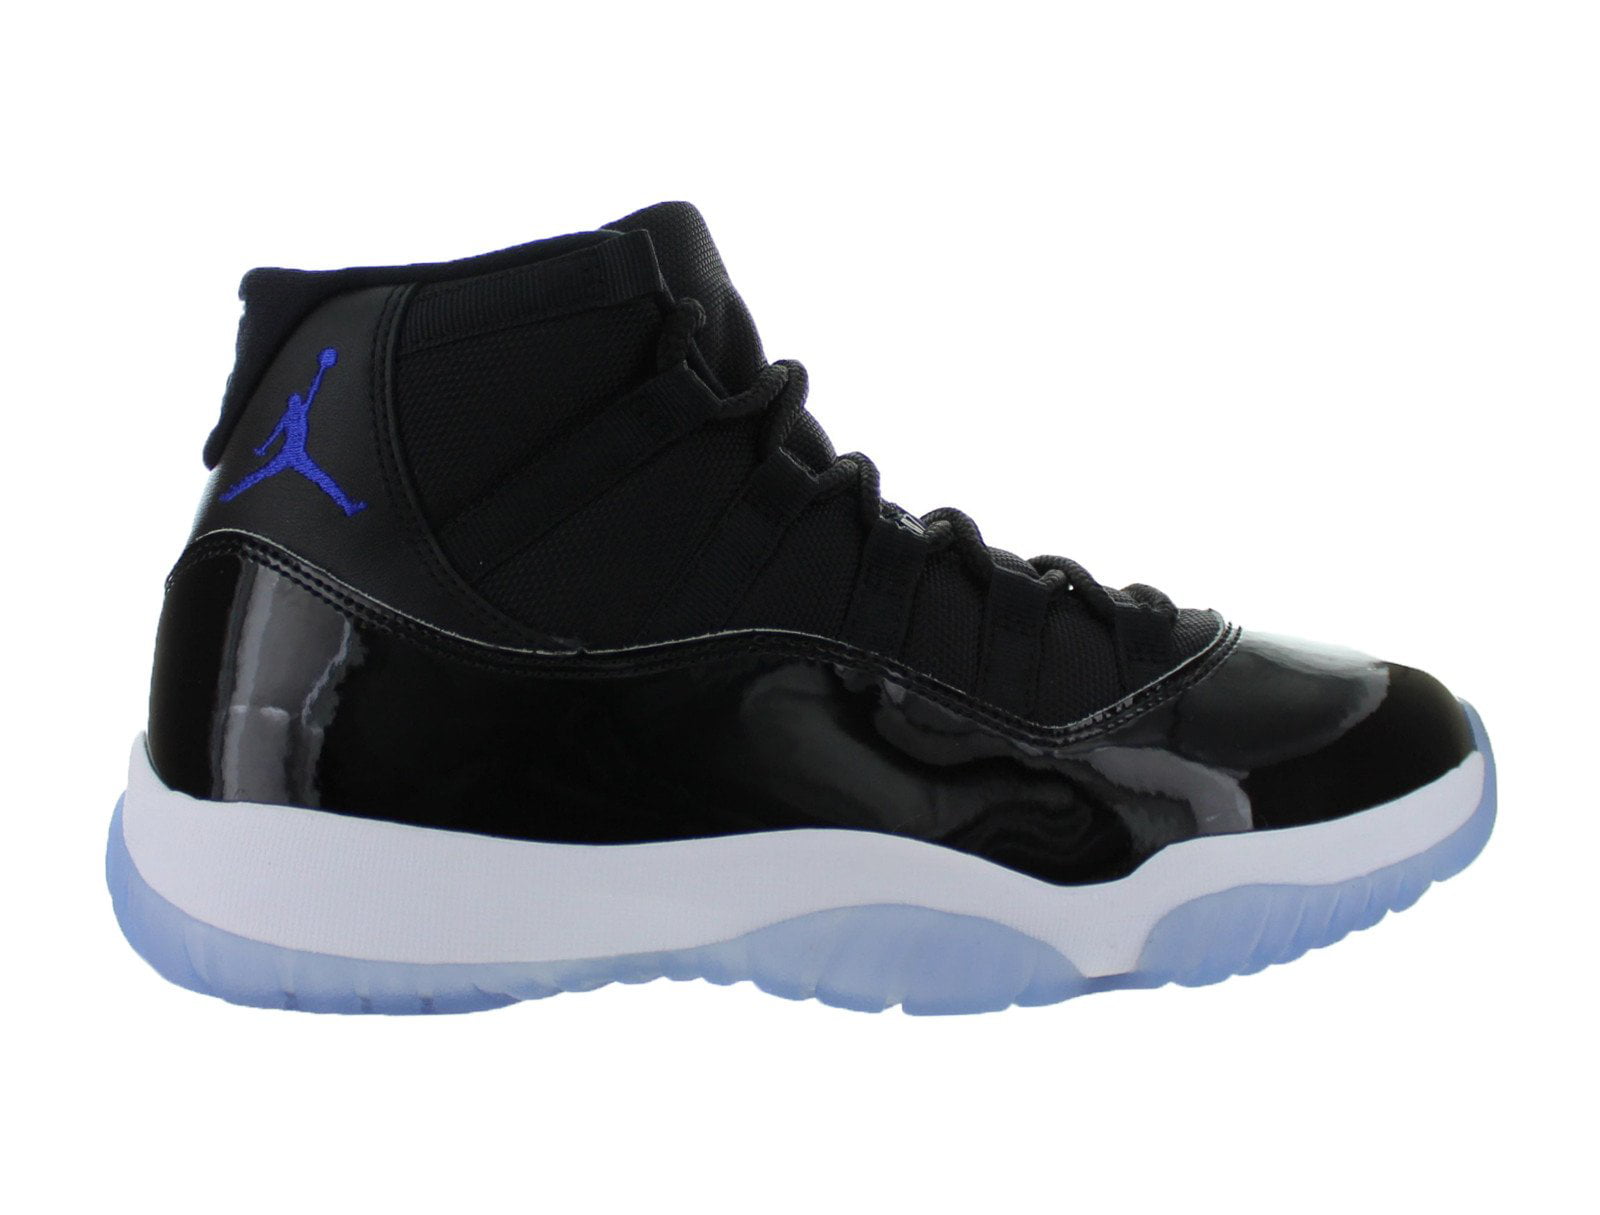 2018 High Quality 11s Space Jam Bred Concord Basketball Shoes Men Sneakers Boys 